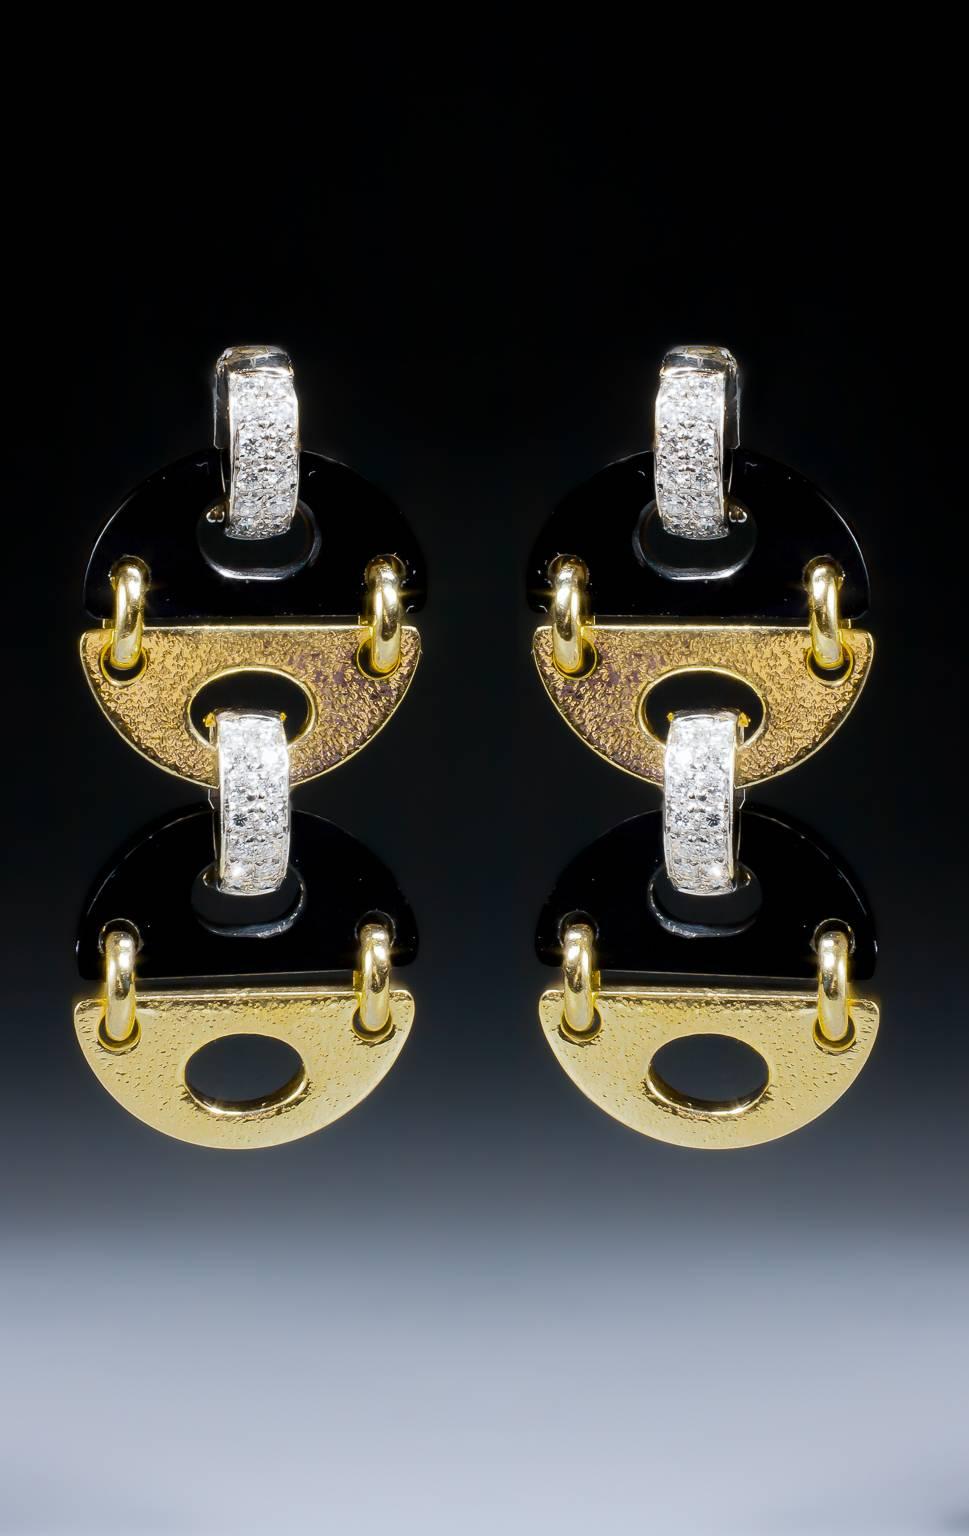 A funky pair of gold, onyx and diamond earrings,composed of pierced onyx and hammered gold half circles with pavé-set brilliant cut diamond connectors, mounted in 18 karat gold. 
Marked 'ITALY' , 18K stands for 18 karat gold.
Total diamond